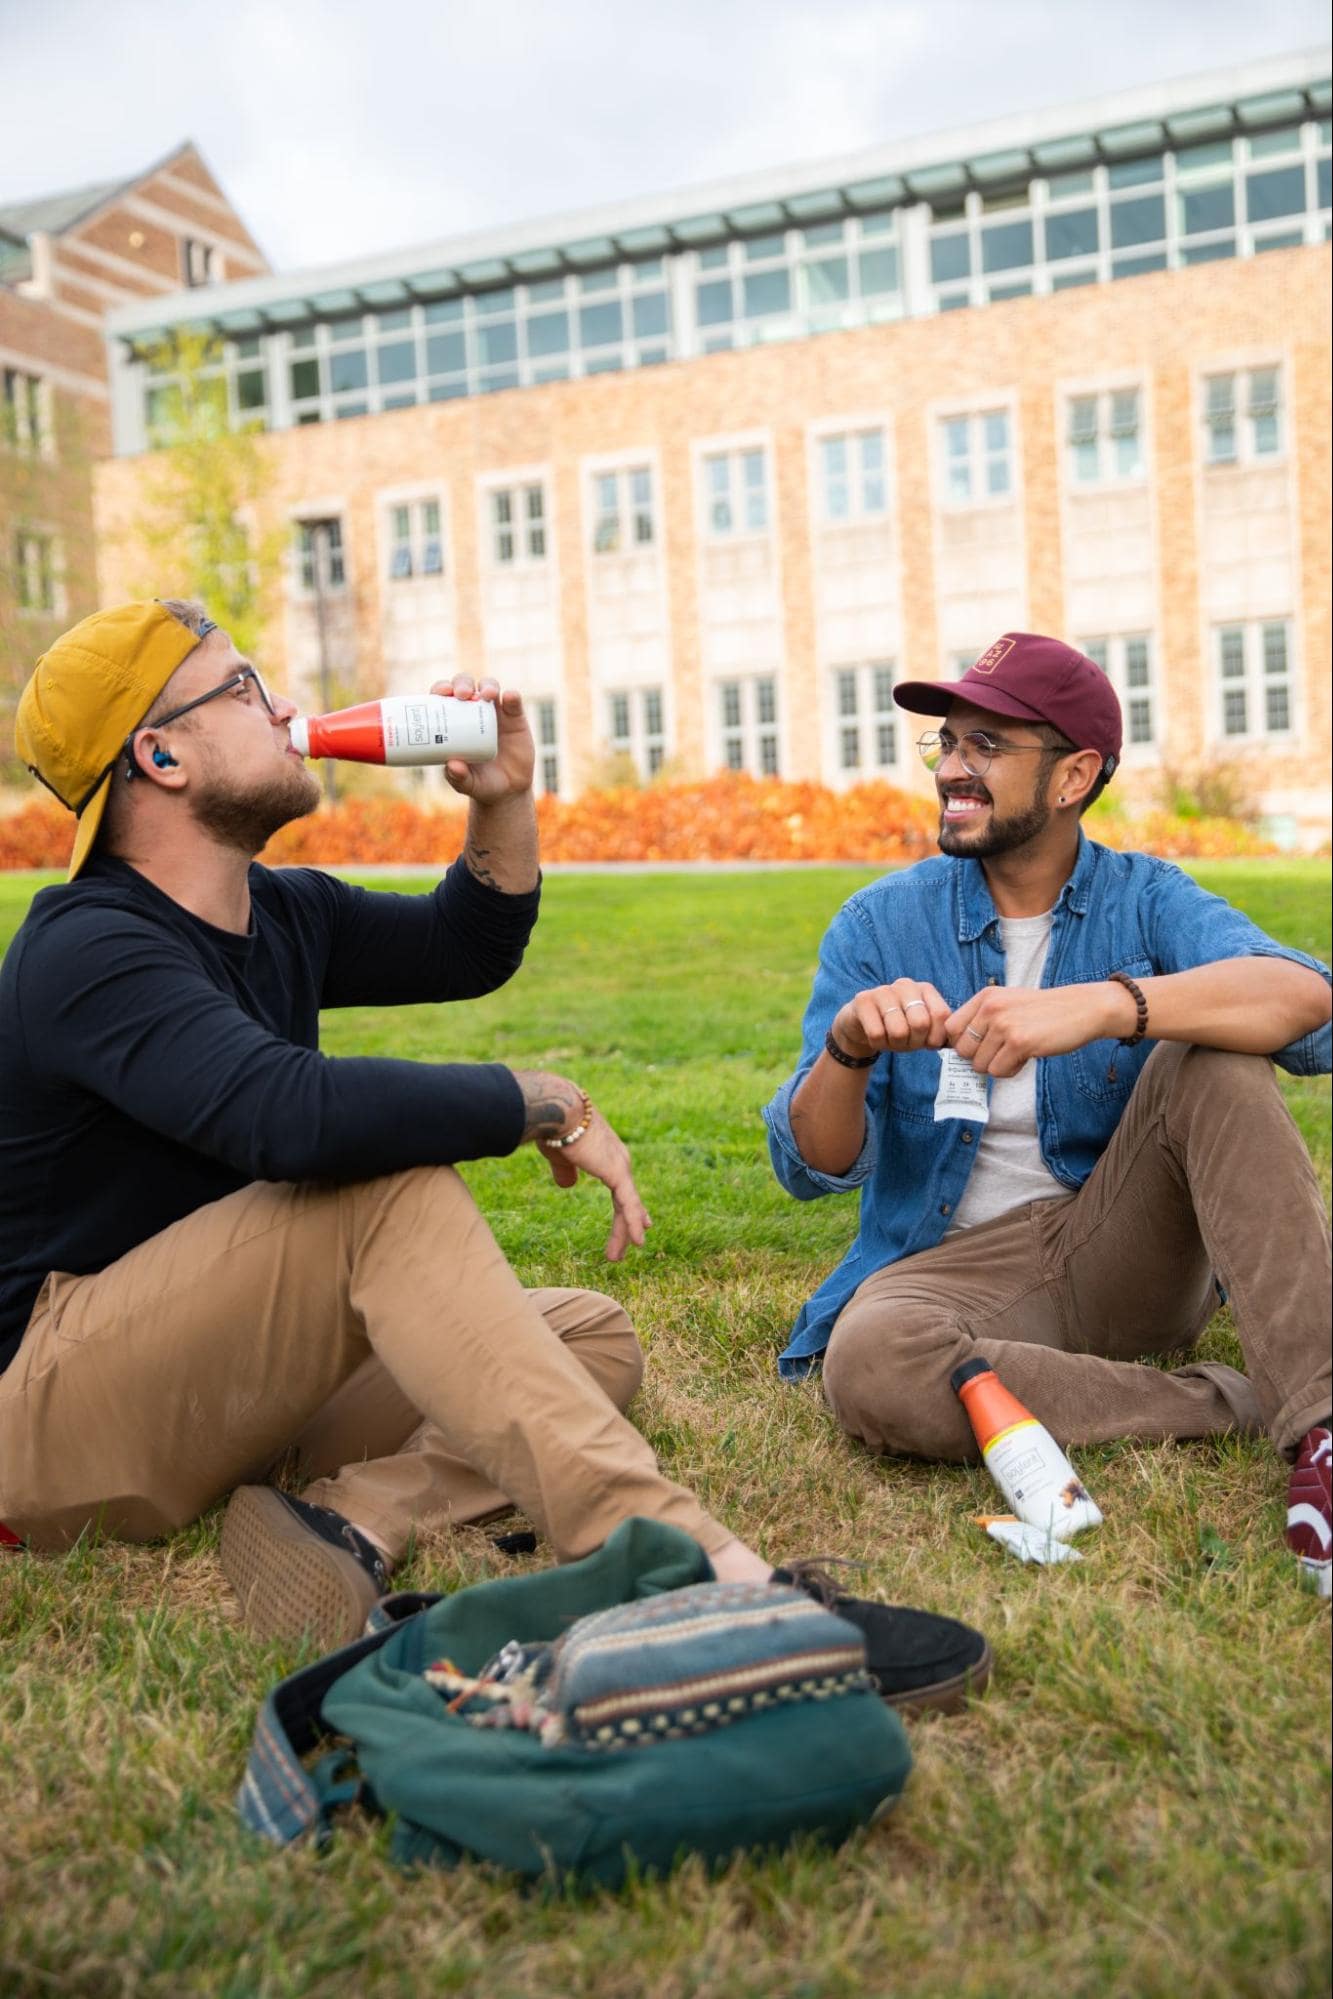 Image of two people sitting on a lawn, drinking Soylent